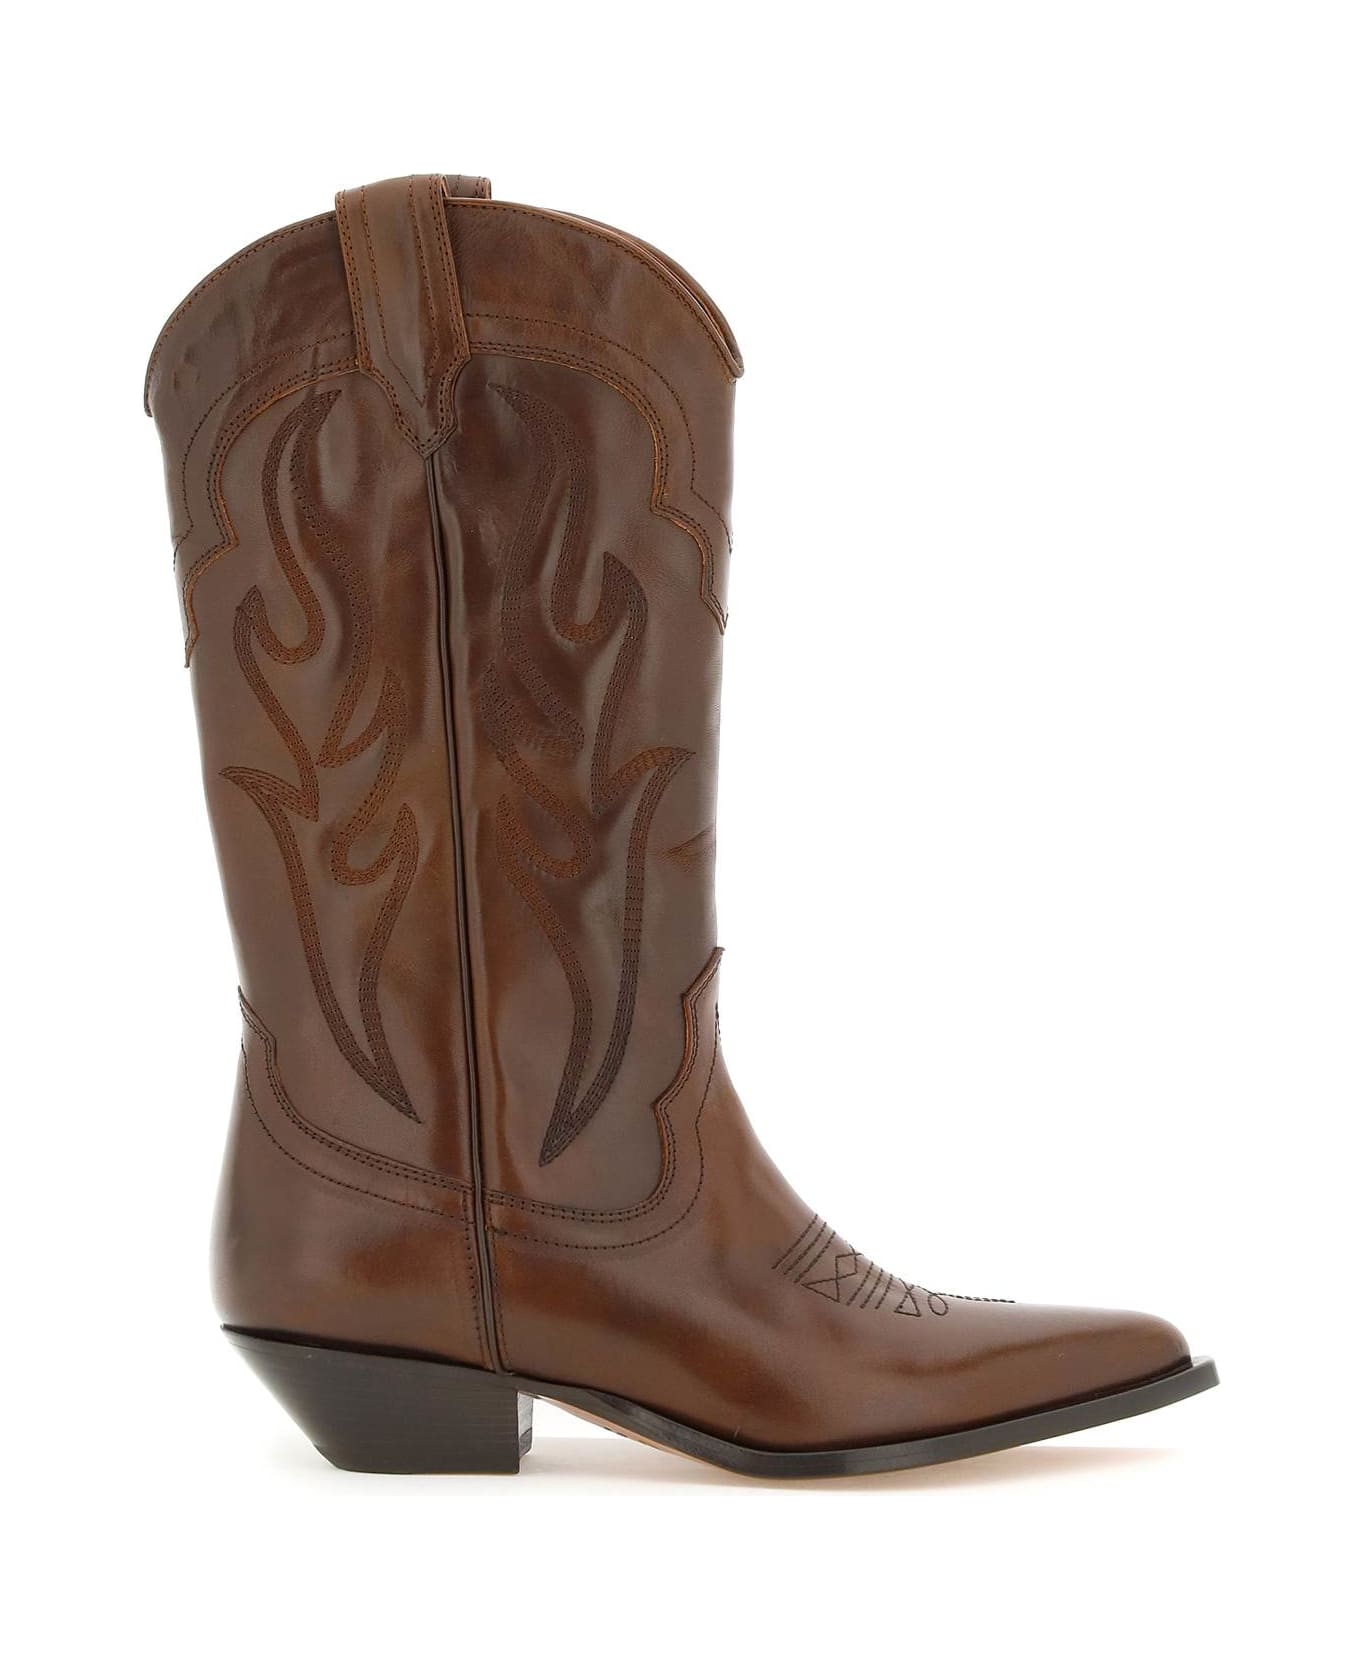 Sonora Brushed Leather Santa Fe Boots - BROWN (Brown)